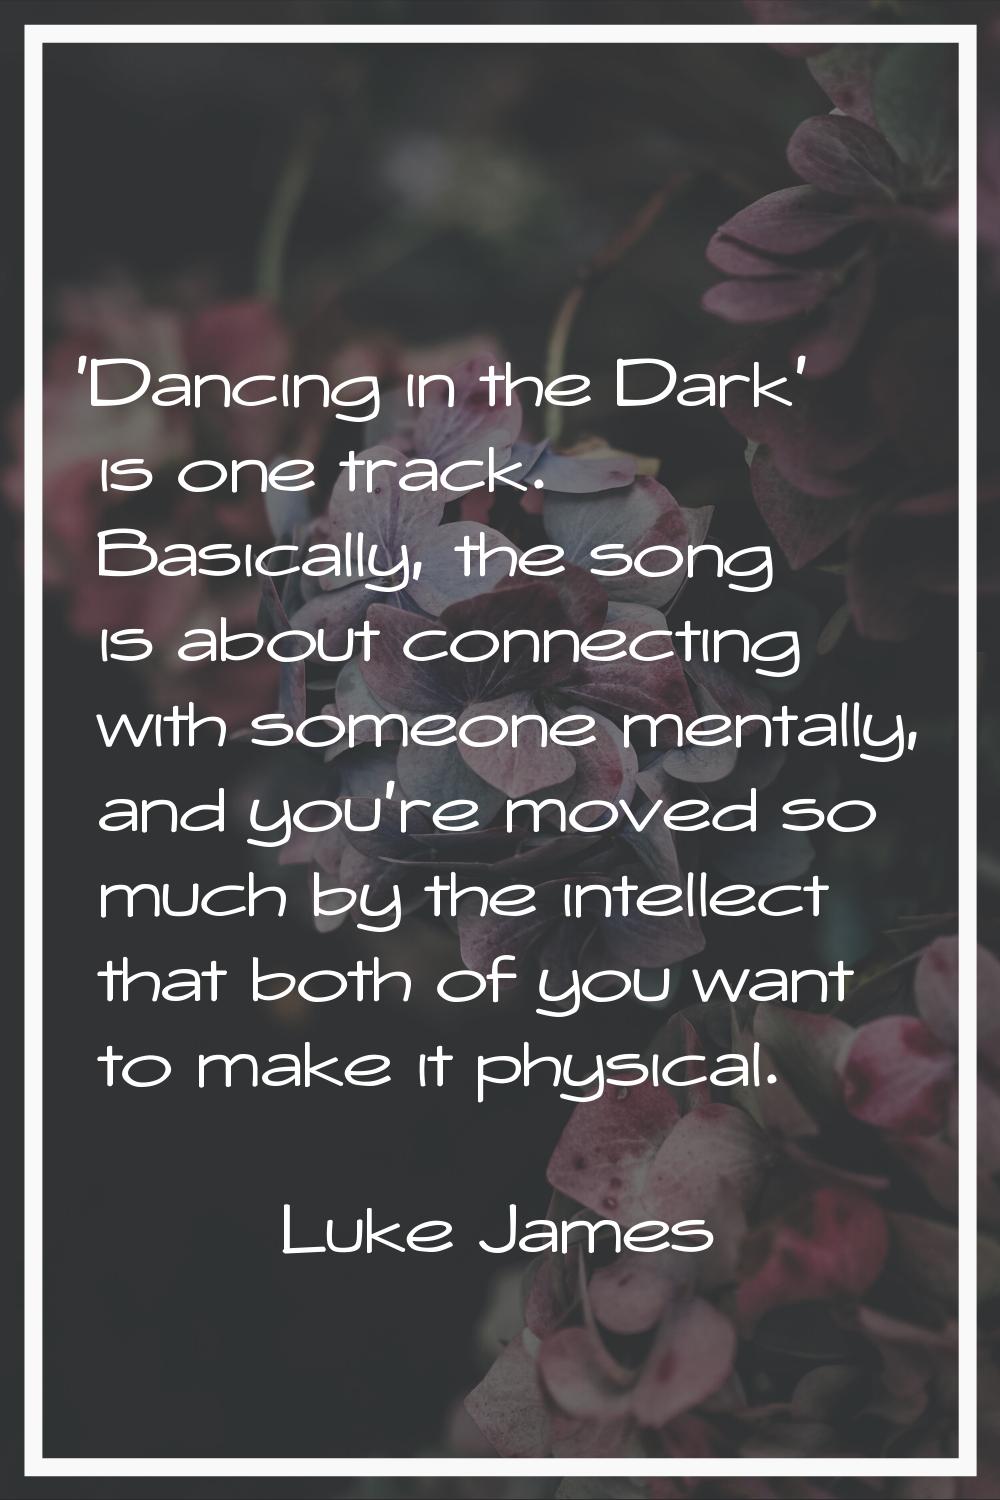 'Dancing in the Dark' is one track. Basically, the song is about connecting with someone mentally, 